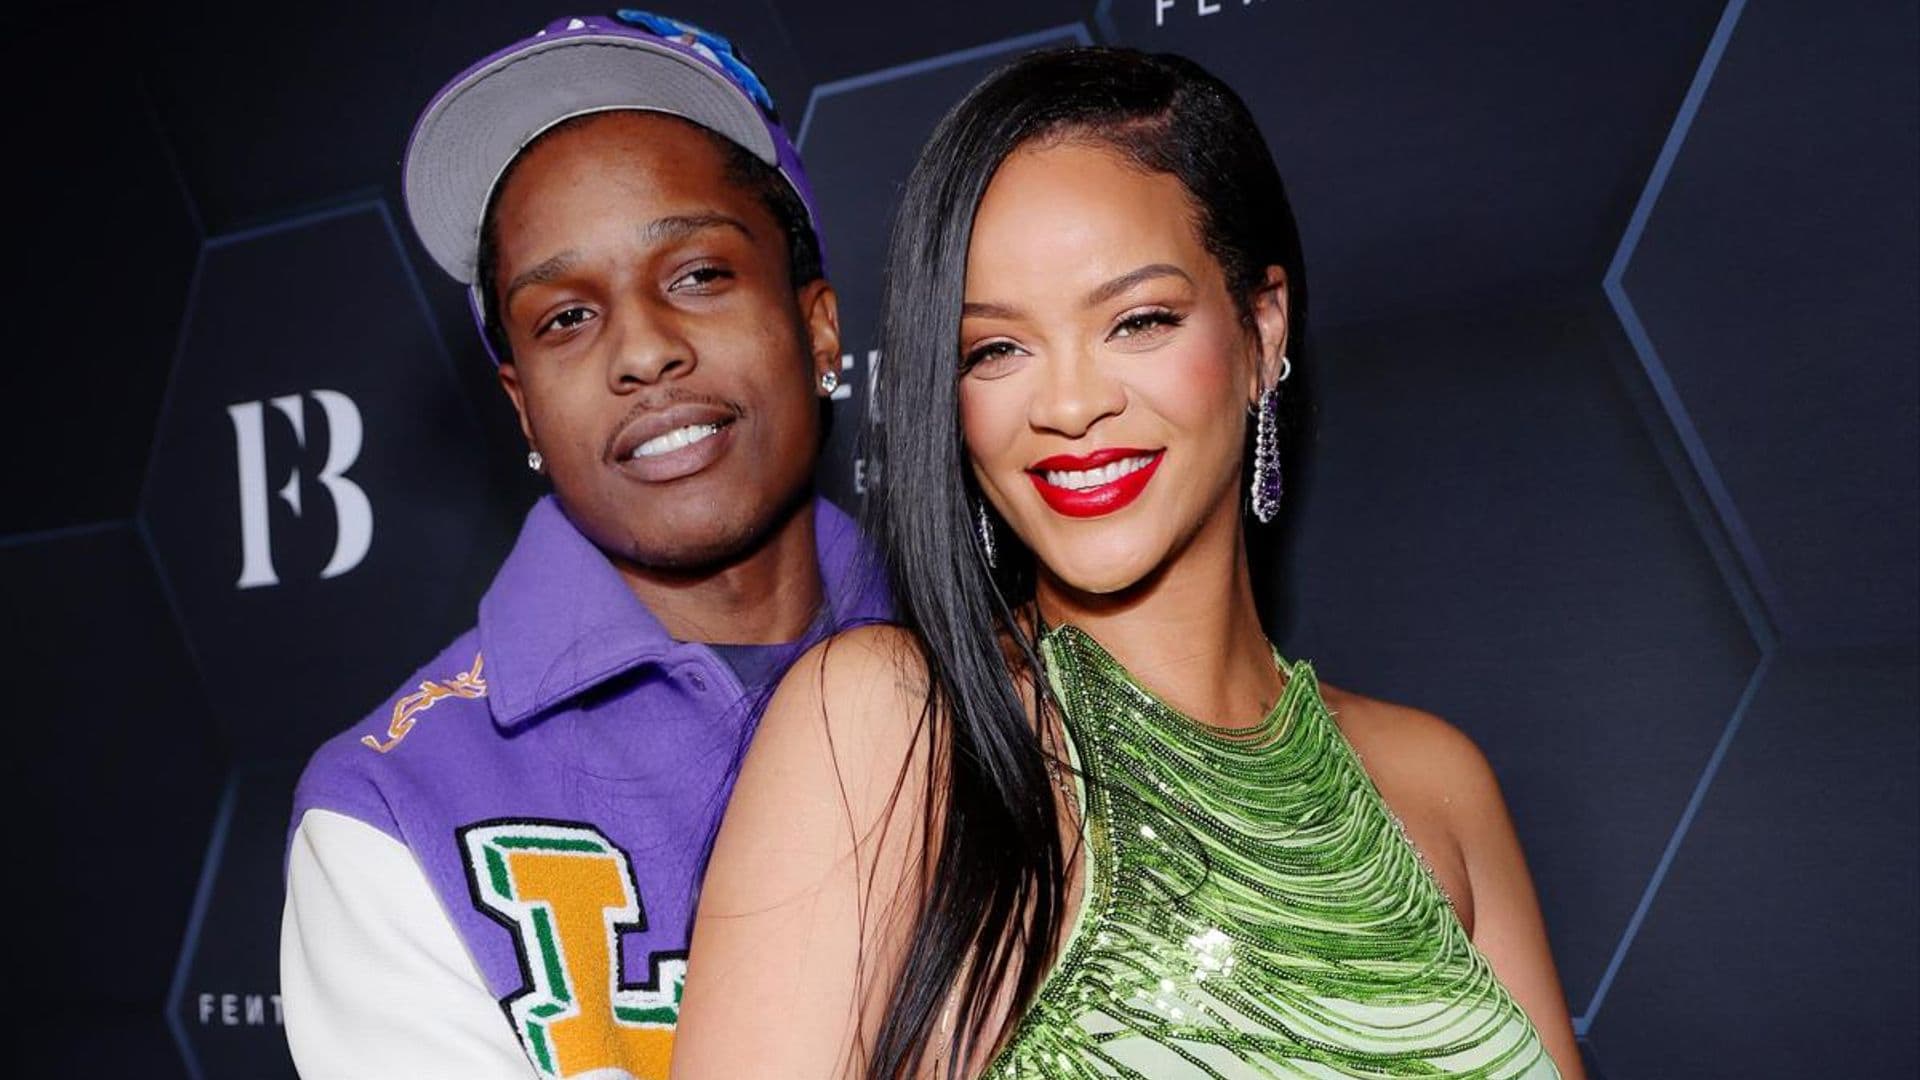 Rihanna & A$AP Rocky welcome their first child together, a baby boy